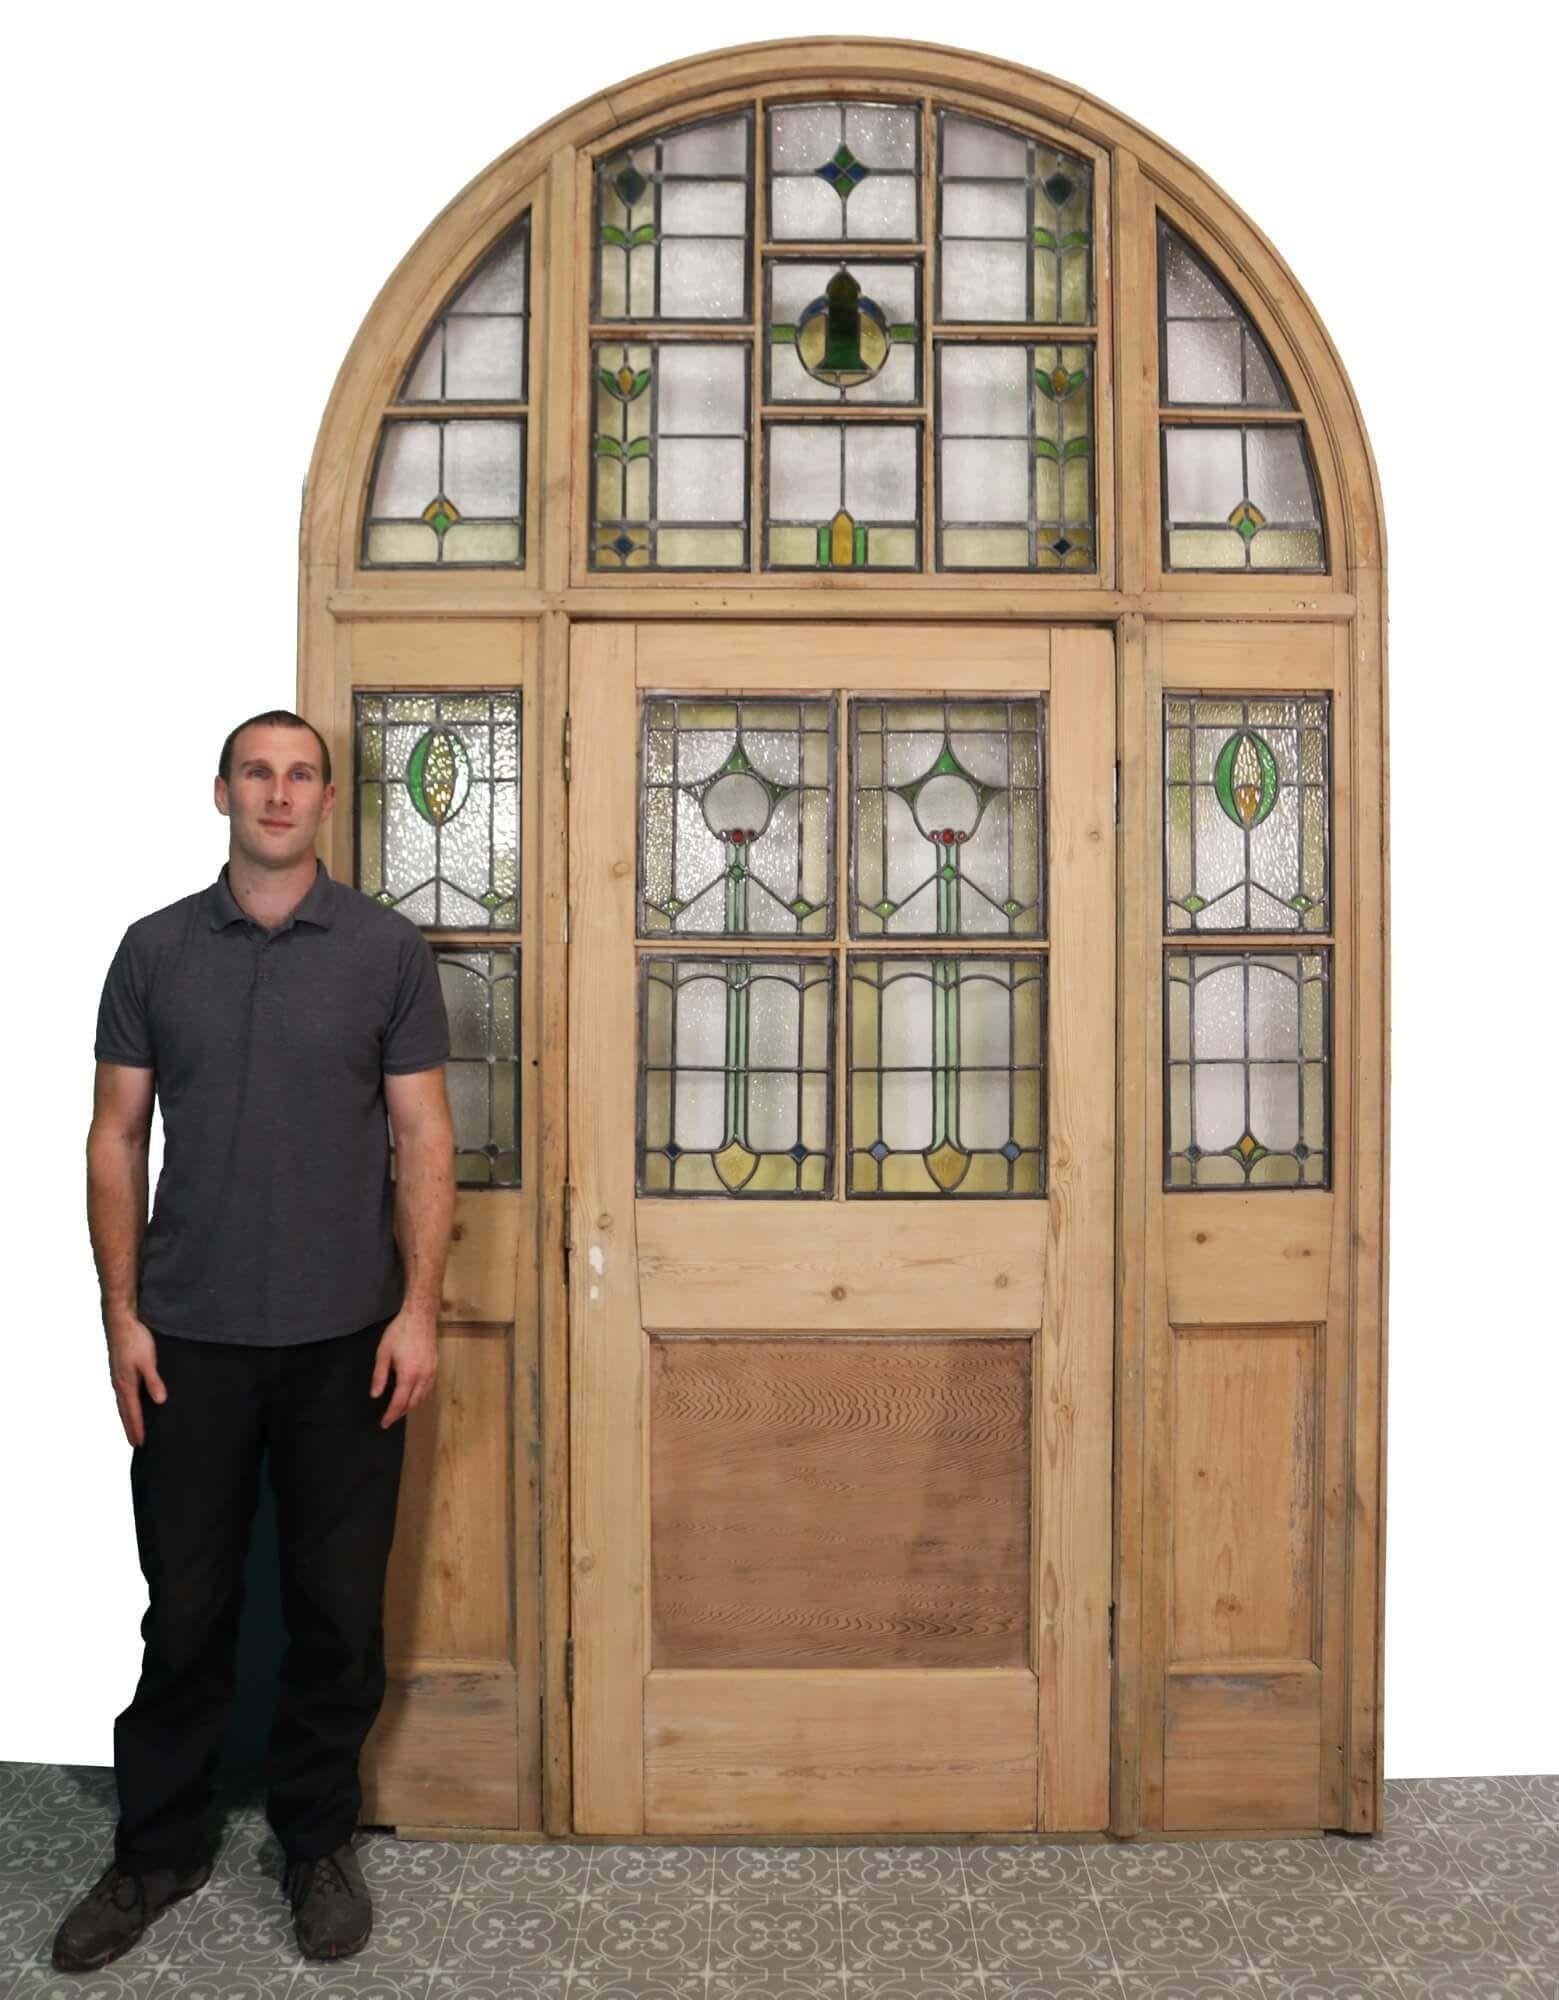 This impressive reclaimed stained glass door with frame provides a stunning entry to a property. Made up of an antique pine door within fixed side panels beneath a glazed arched demilune top, it is a rare find and in beautiful condition, having